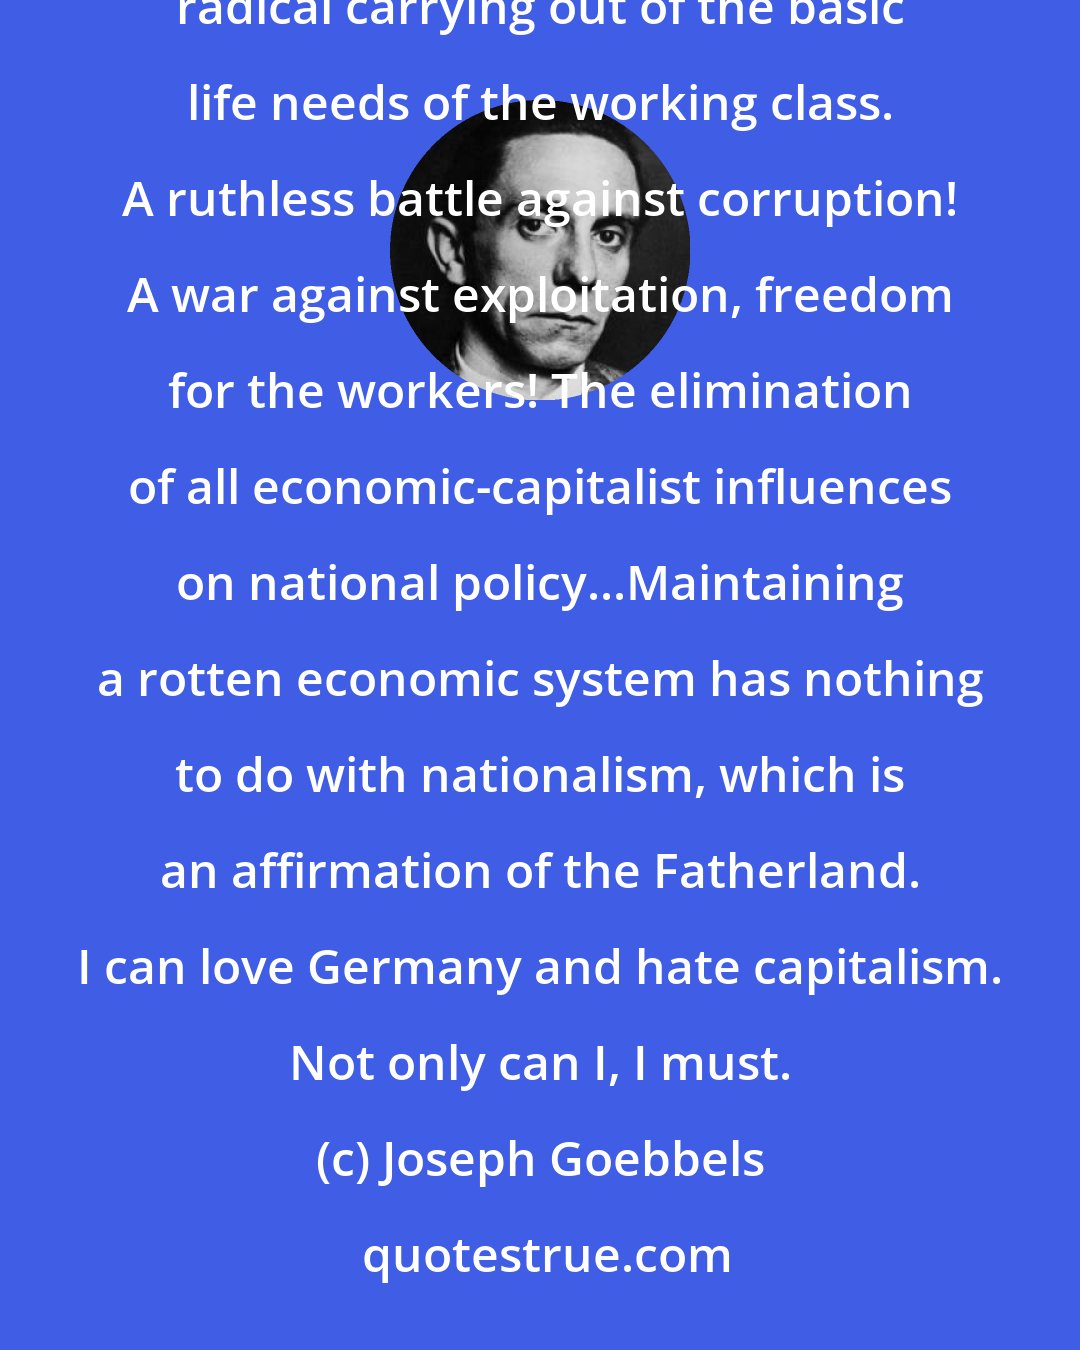 Joseph Goebbels: The people's community must not be a mere phrase, but a revolutionary achievement following from the radical carrying out of the basic life needs of the working class. A ruthless battle against corruption! A war against exploitation, freedom for the workers! The elimination of all economic-capitalist influences on national policy...Maintaining a rotten economic system has nothing to do with nationalism, which is an affirmation of the Fatherland. I can love Germany and hate capitalism. Not only can I, I must.